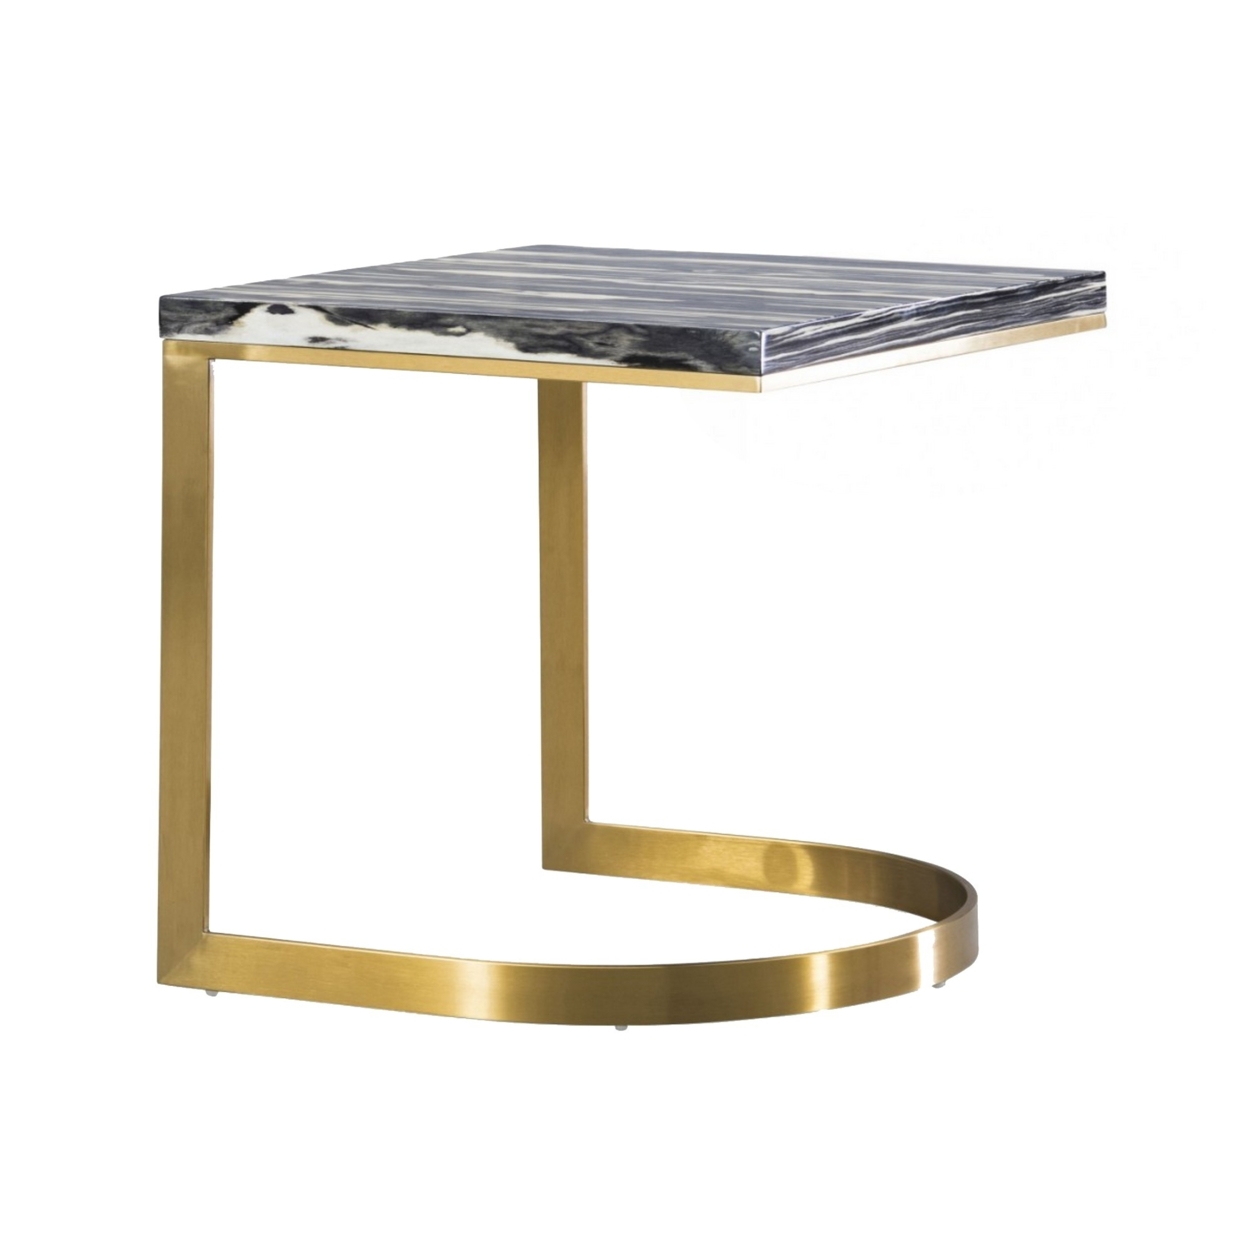 Faux Marble Top End Table With Metal Round Cantilever Base, Black And Gold- Saltoro Sherpi